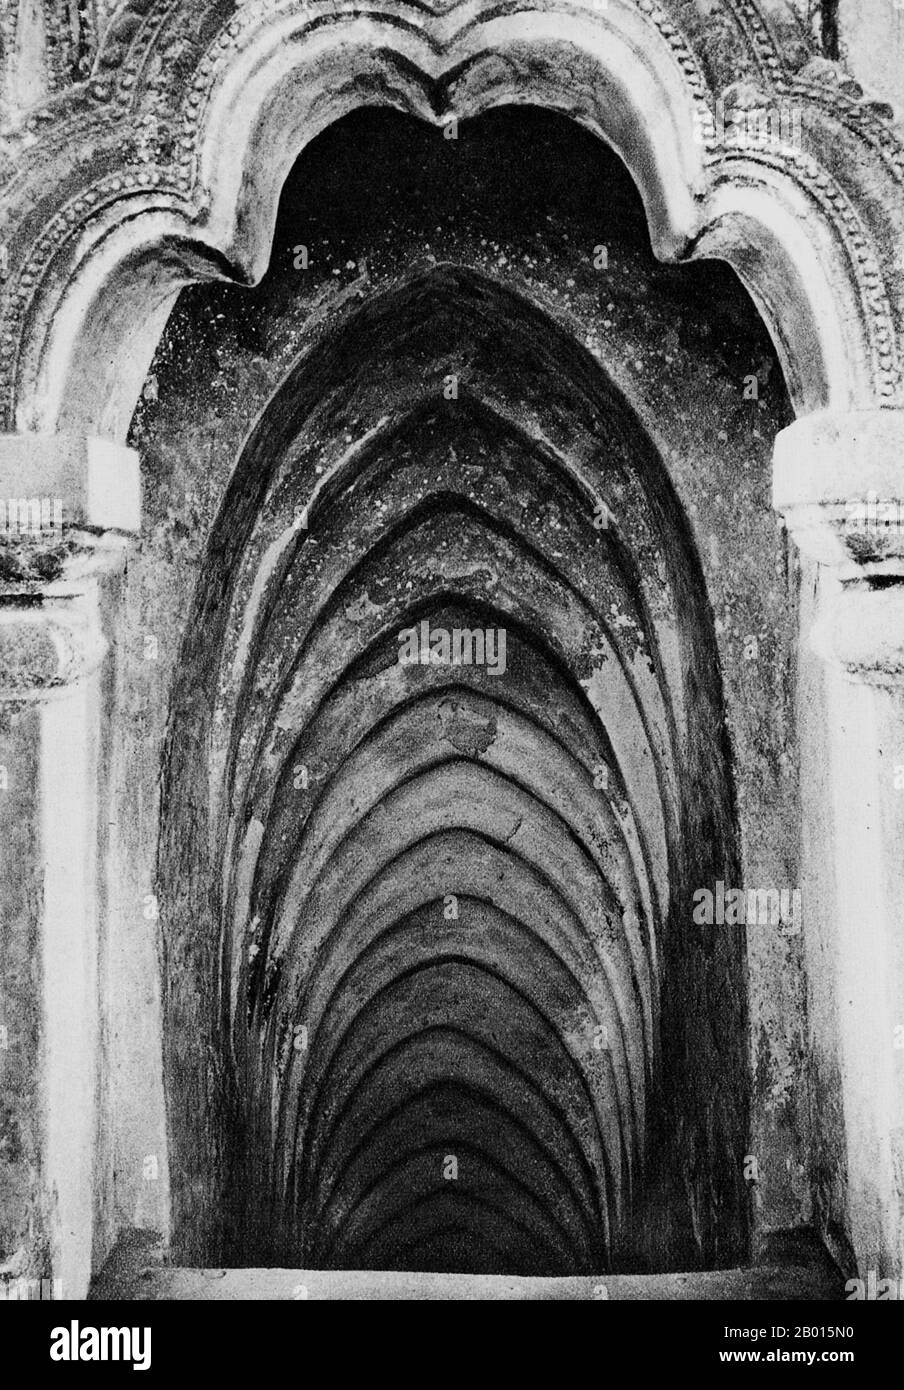 Burma/Myanmar: A staircase inside Thatbyinnyu Pagoda in Bagan, Upper Burma, c. 1920s.  The 61 m-high Thatbyinnyu temple was built as a Buddhist monastery (vihara) in 1144 during the reign of King Alaungsithu. It is adjacent to Ananda Temple. Thatbyinnyu Temple is shaped like a cross, but is not symmetrical. The temple has two primary storeys, with the seated Buddha image located on the second storey.  The ruins of Bagan (also spelled Pagan) cover an area of 16 square miles (41 km2). The majority of its buildings were built between the 11th and 13th centuries, when Bagan was capital. Stock Photo